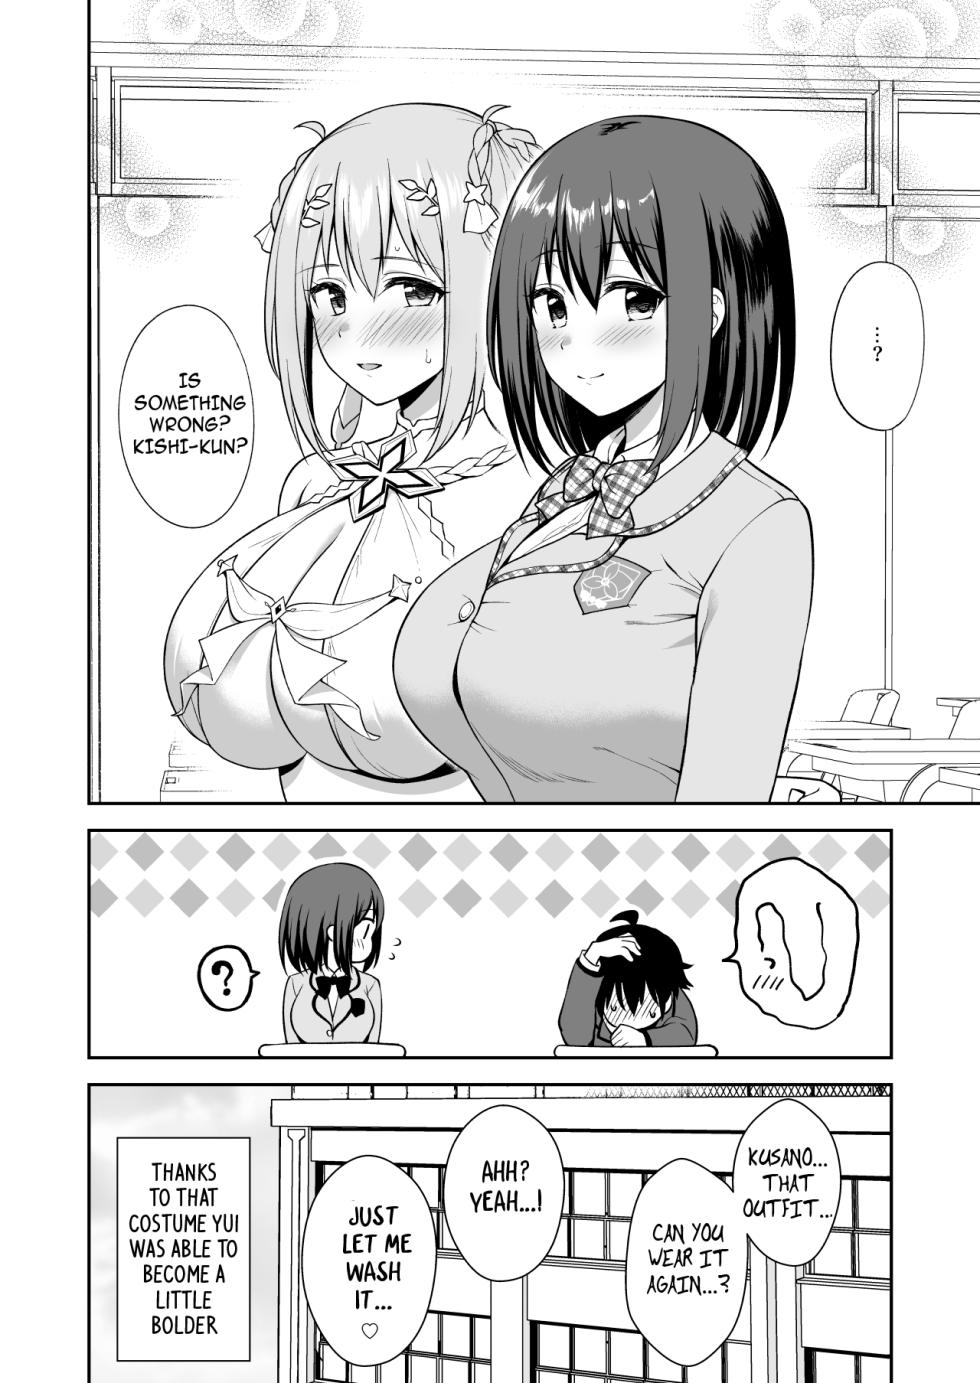 [Tanabata Milky Way (Yue)] GyuiConne! (Princess Connect! Re:Dive) [English] [Digital] - Page 28